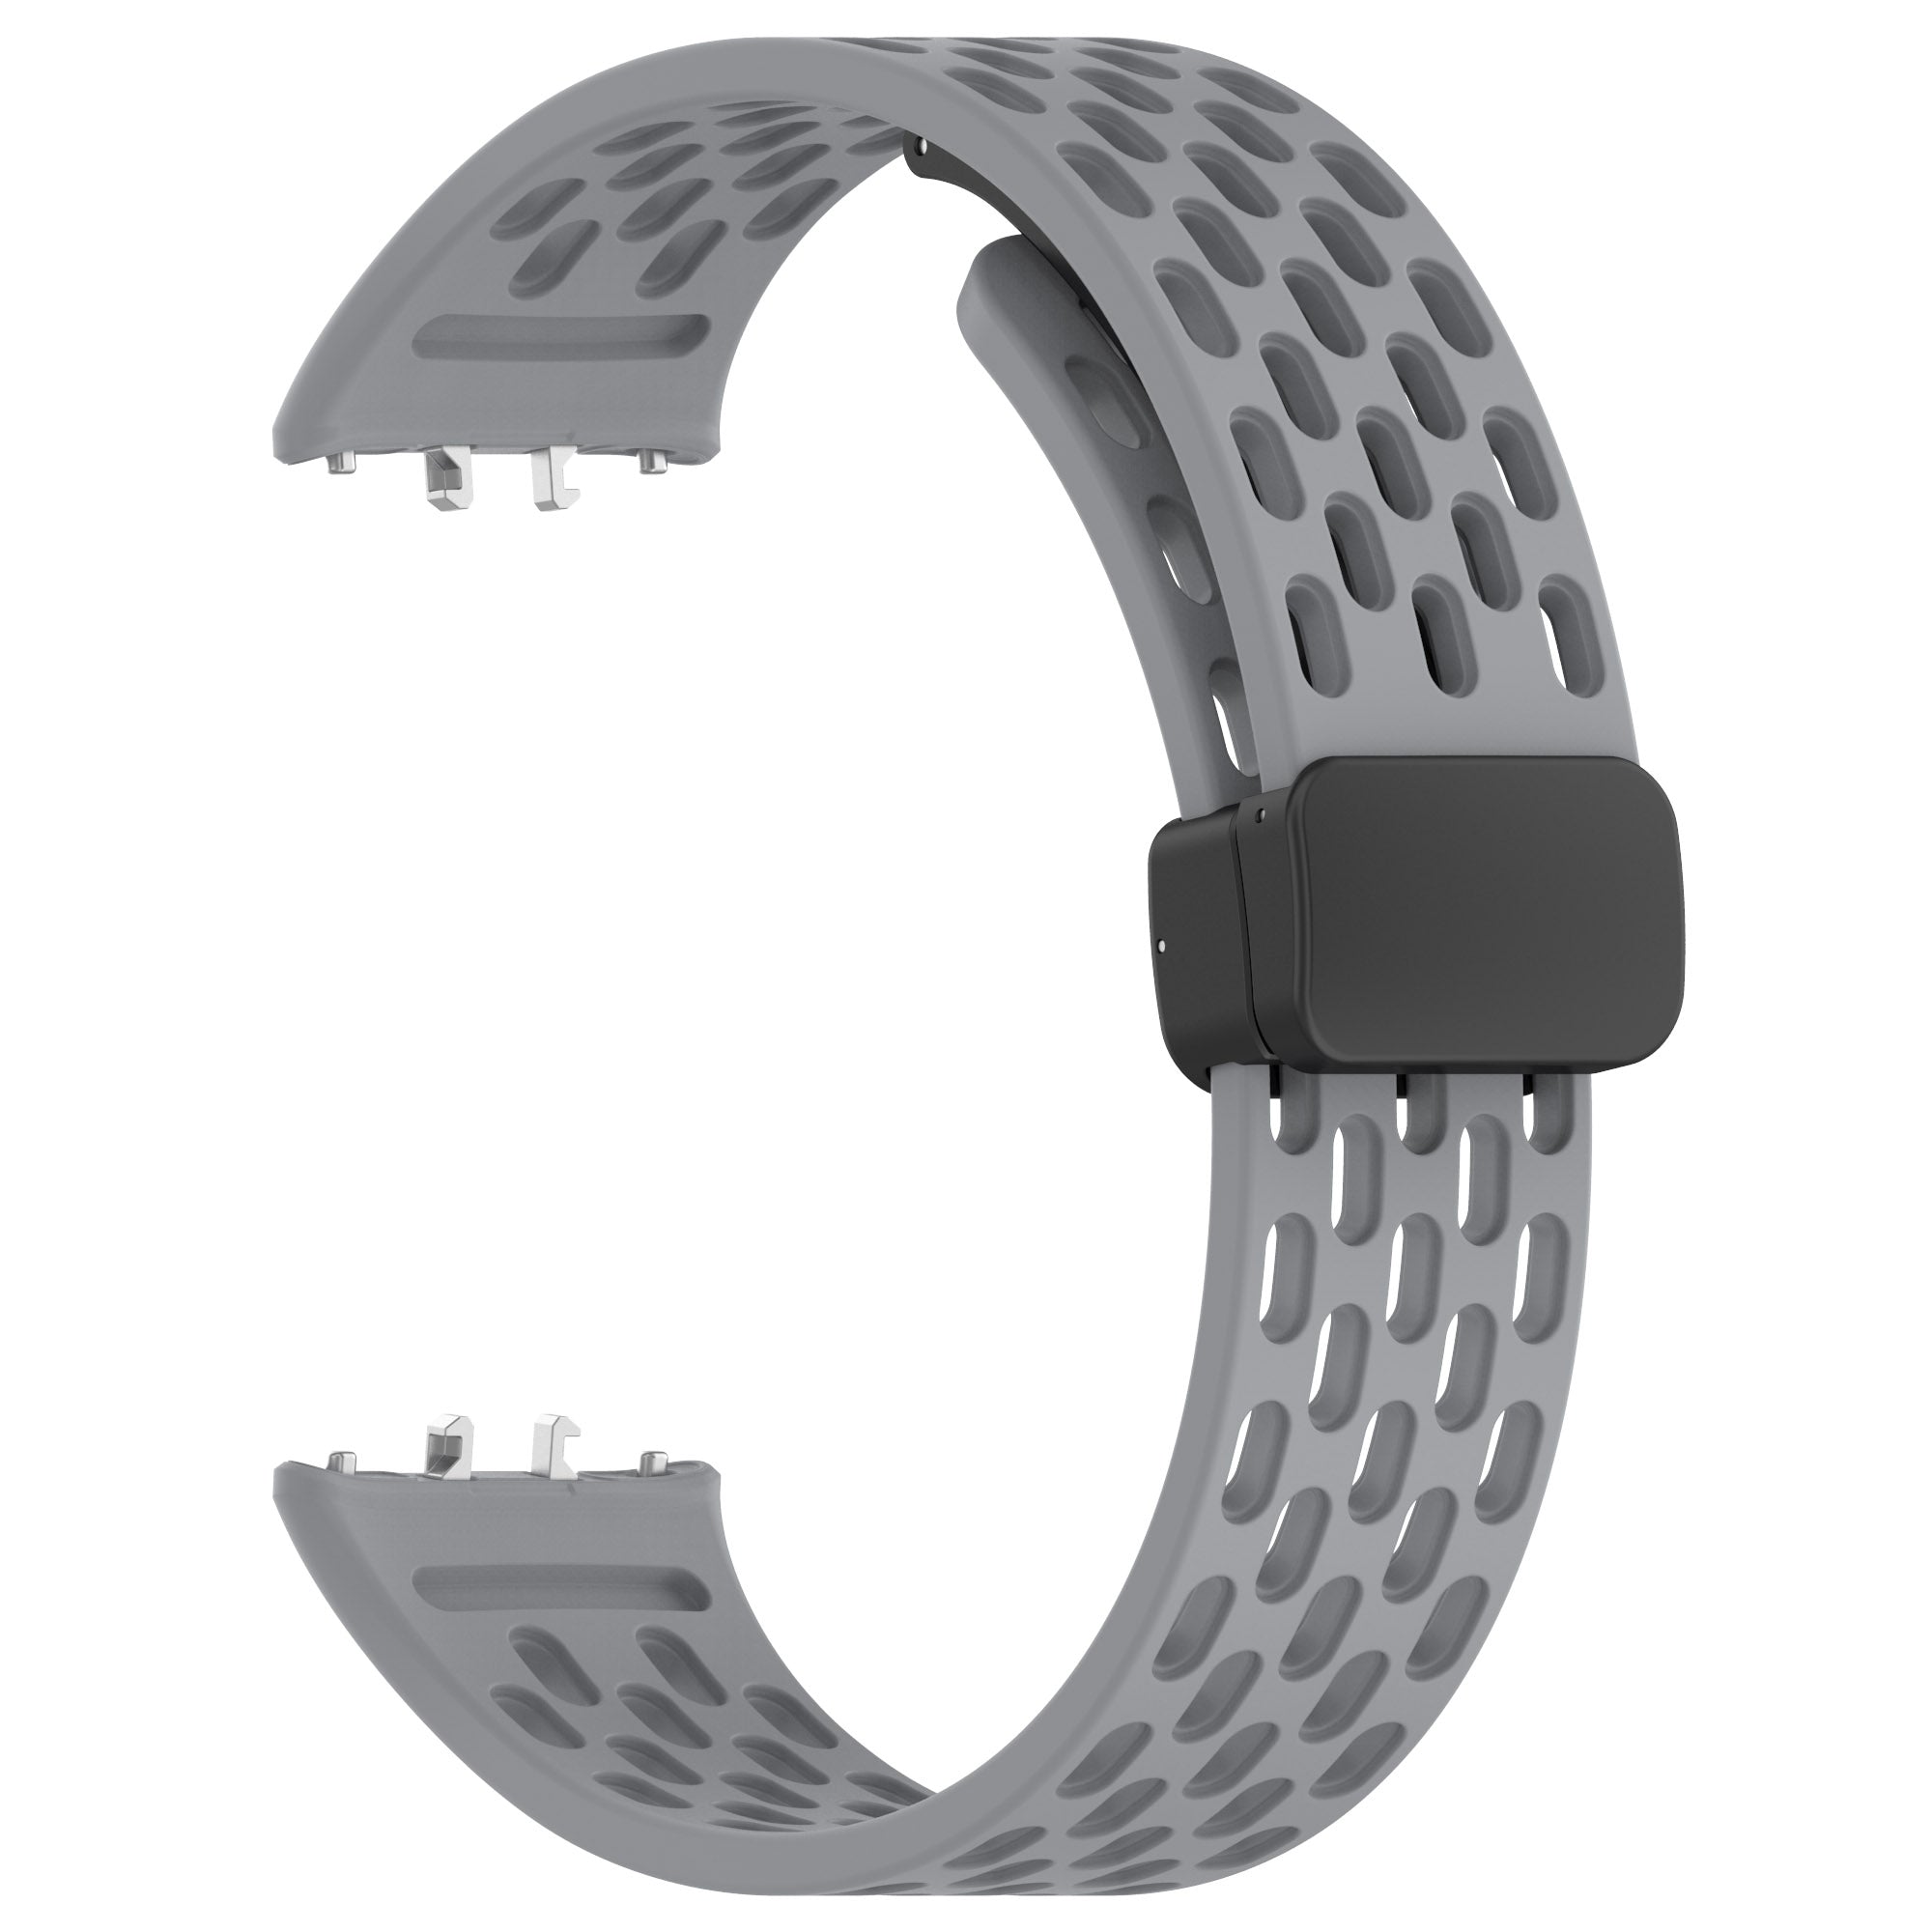 Wrist Band for Samsung Galaxy Fit3 R930 Magnetic Silicone Smartwatch Bracelet Strap - Grey